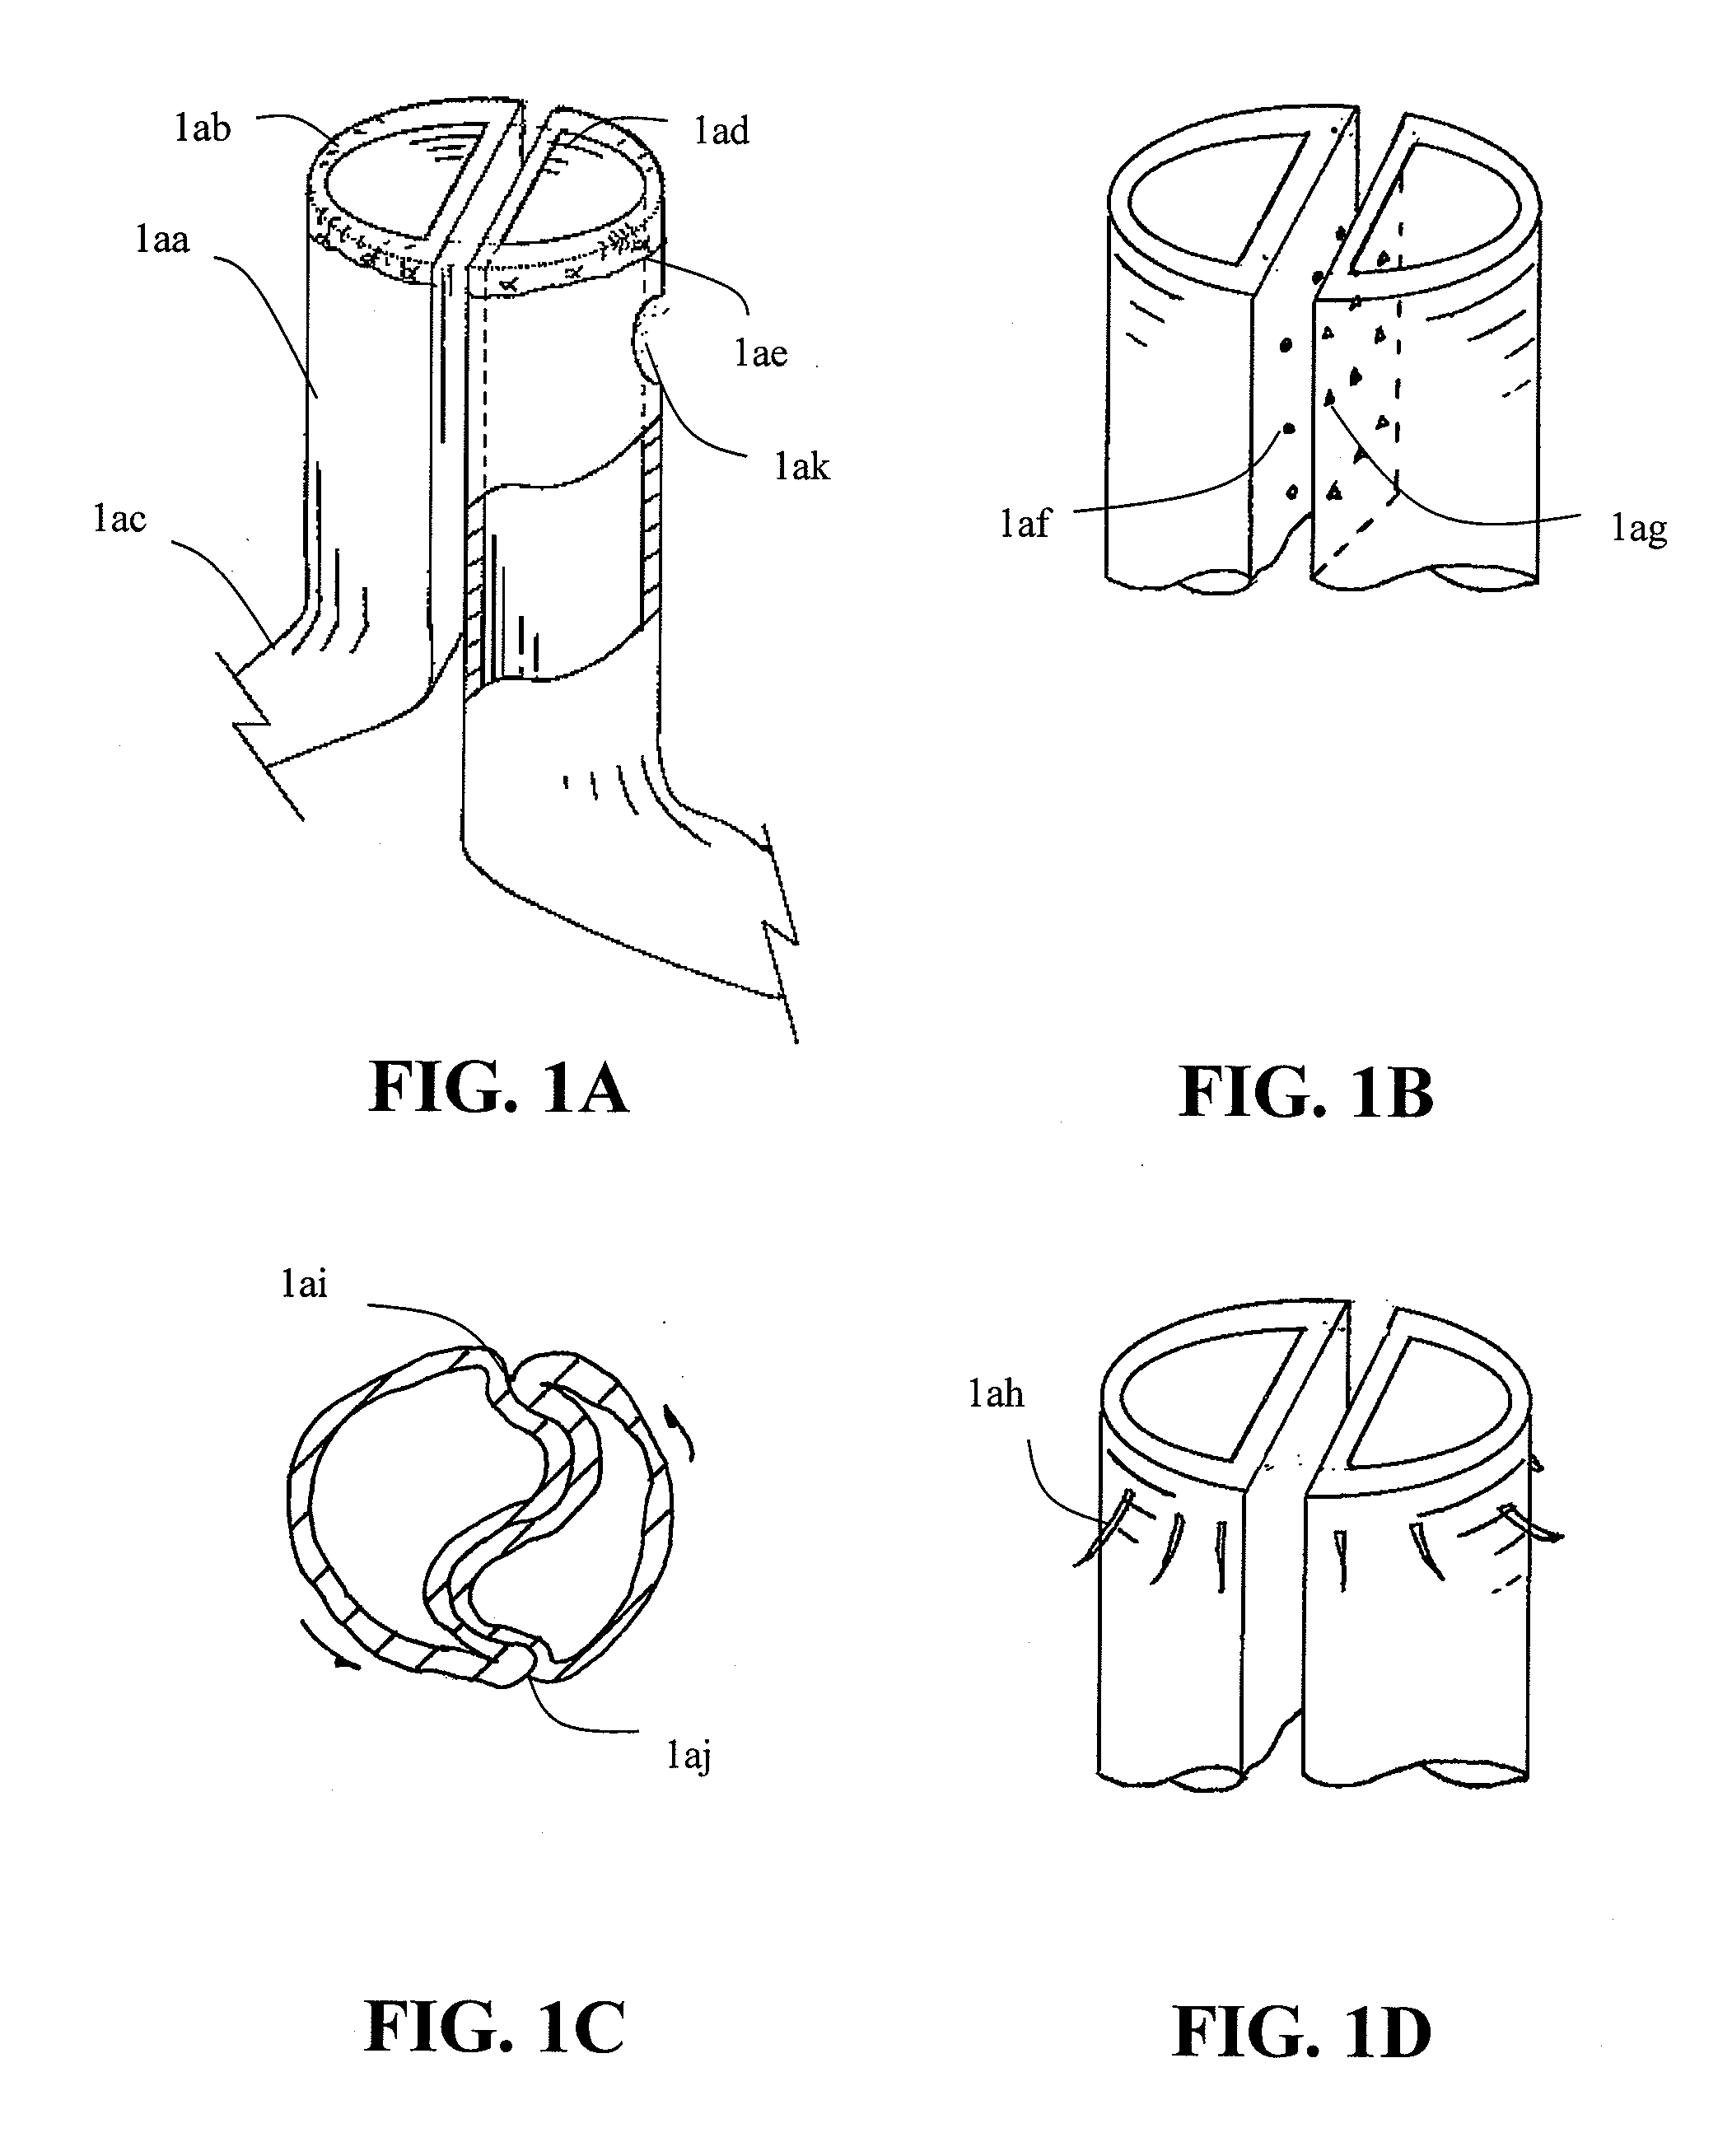 Devices and methods for treatment of abdominal aortic aneurysms